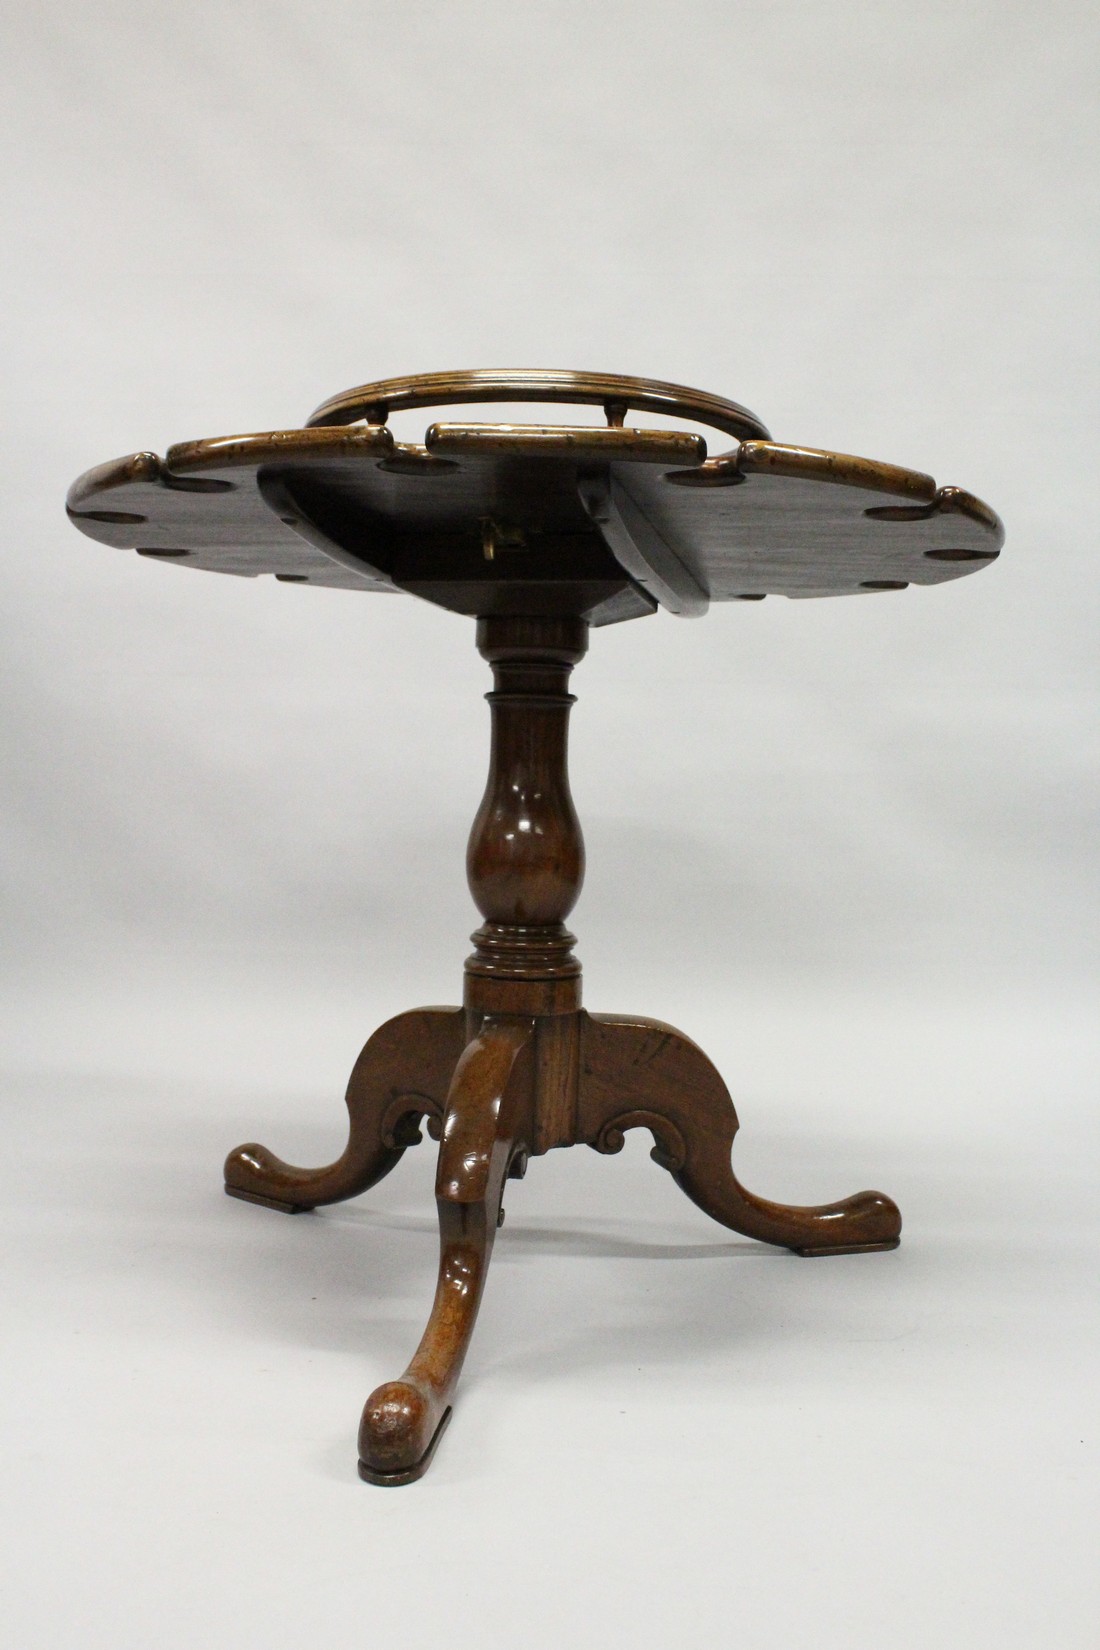 A GEORGE III STYLE MAHOGANY SHIP'S TRIPOD TABLE with centre section for bottles. The sides with - Image 4 of 6